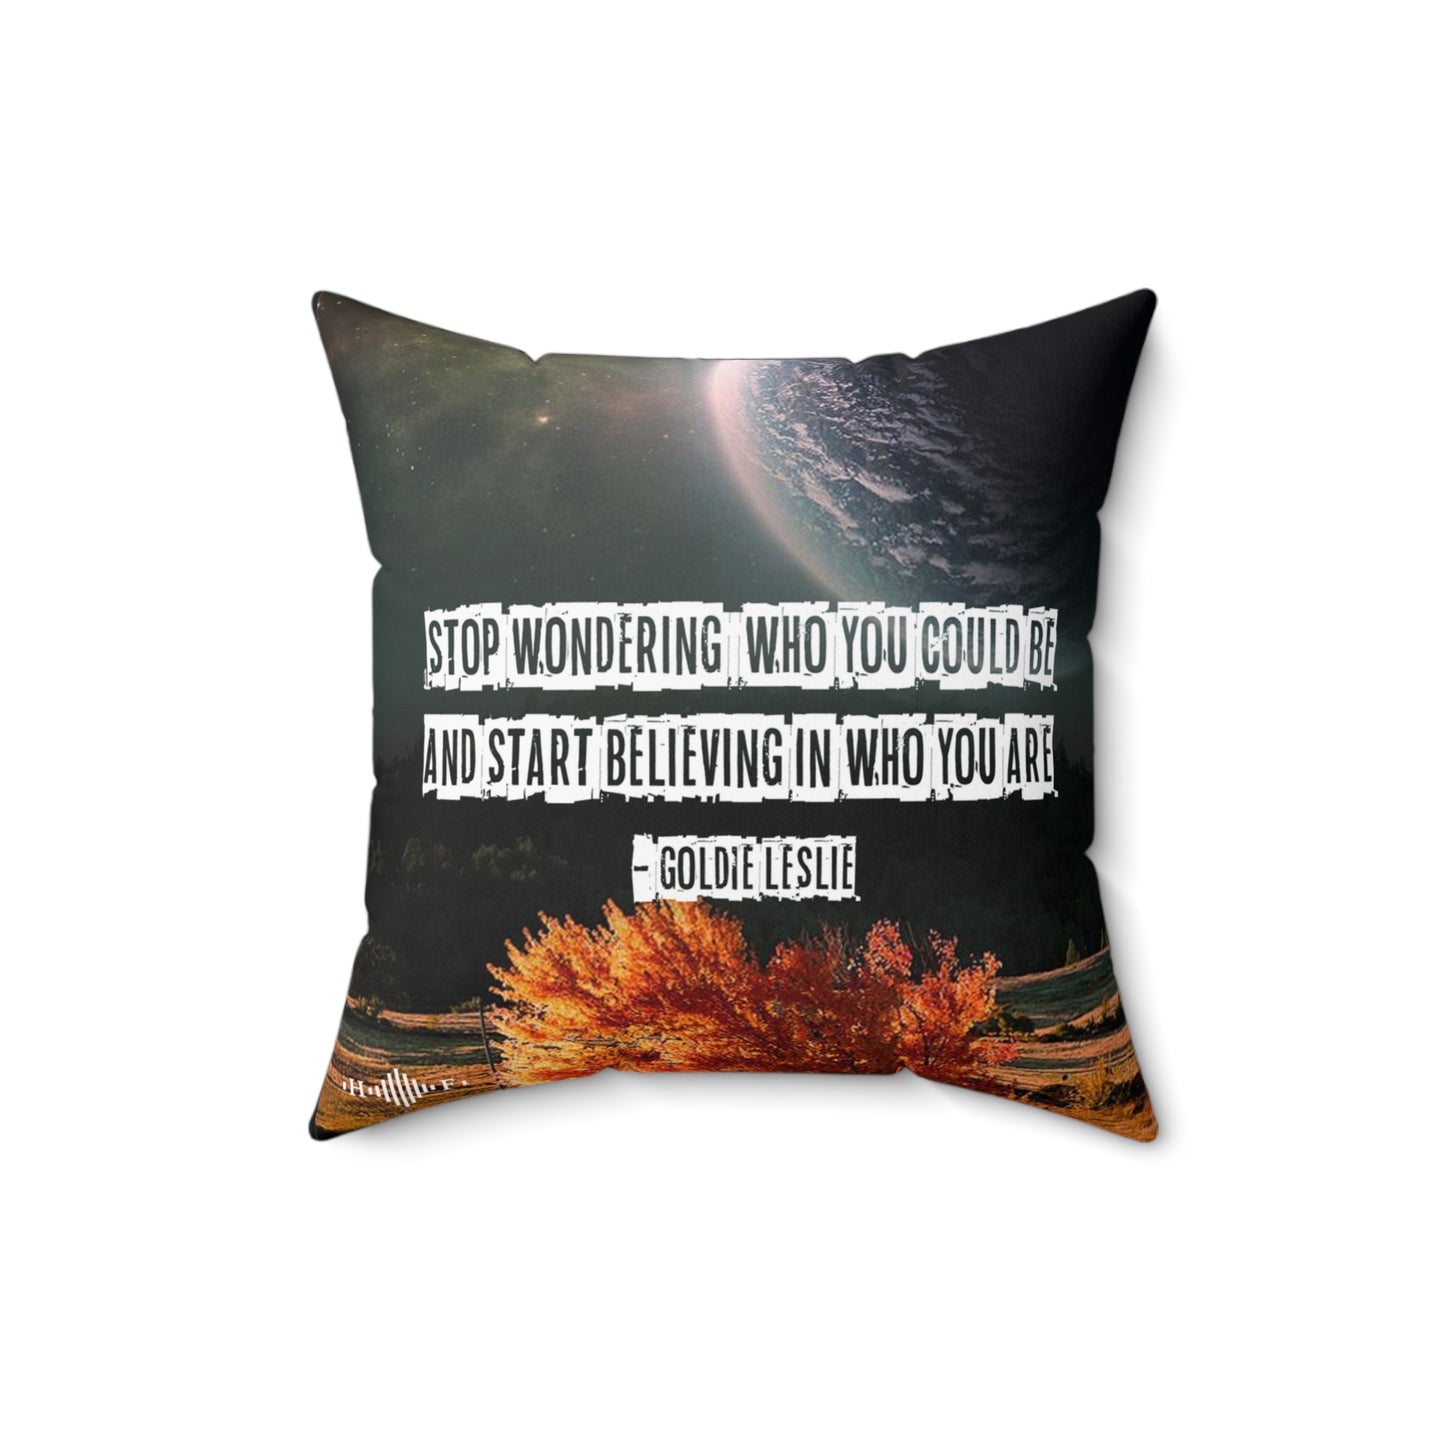 Growth is key - Square Pillow